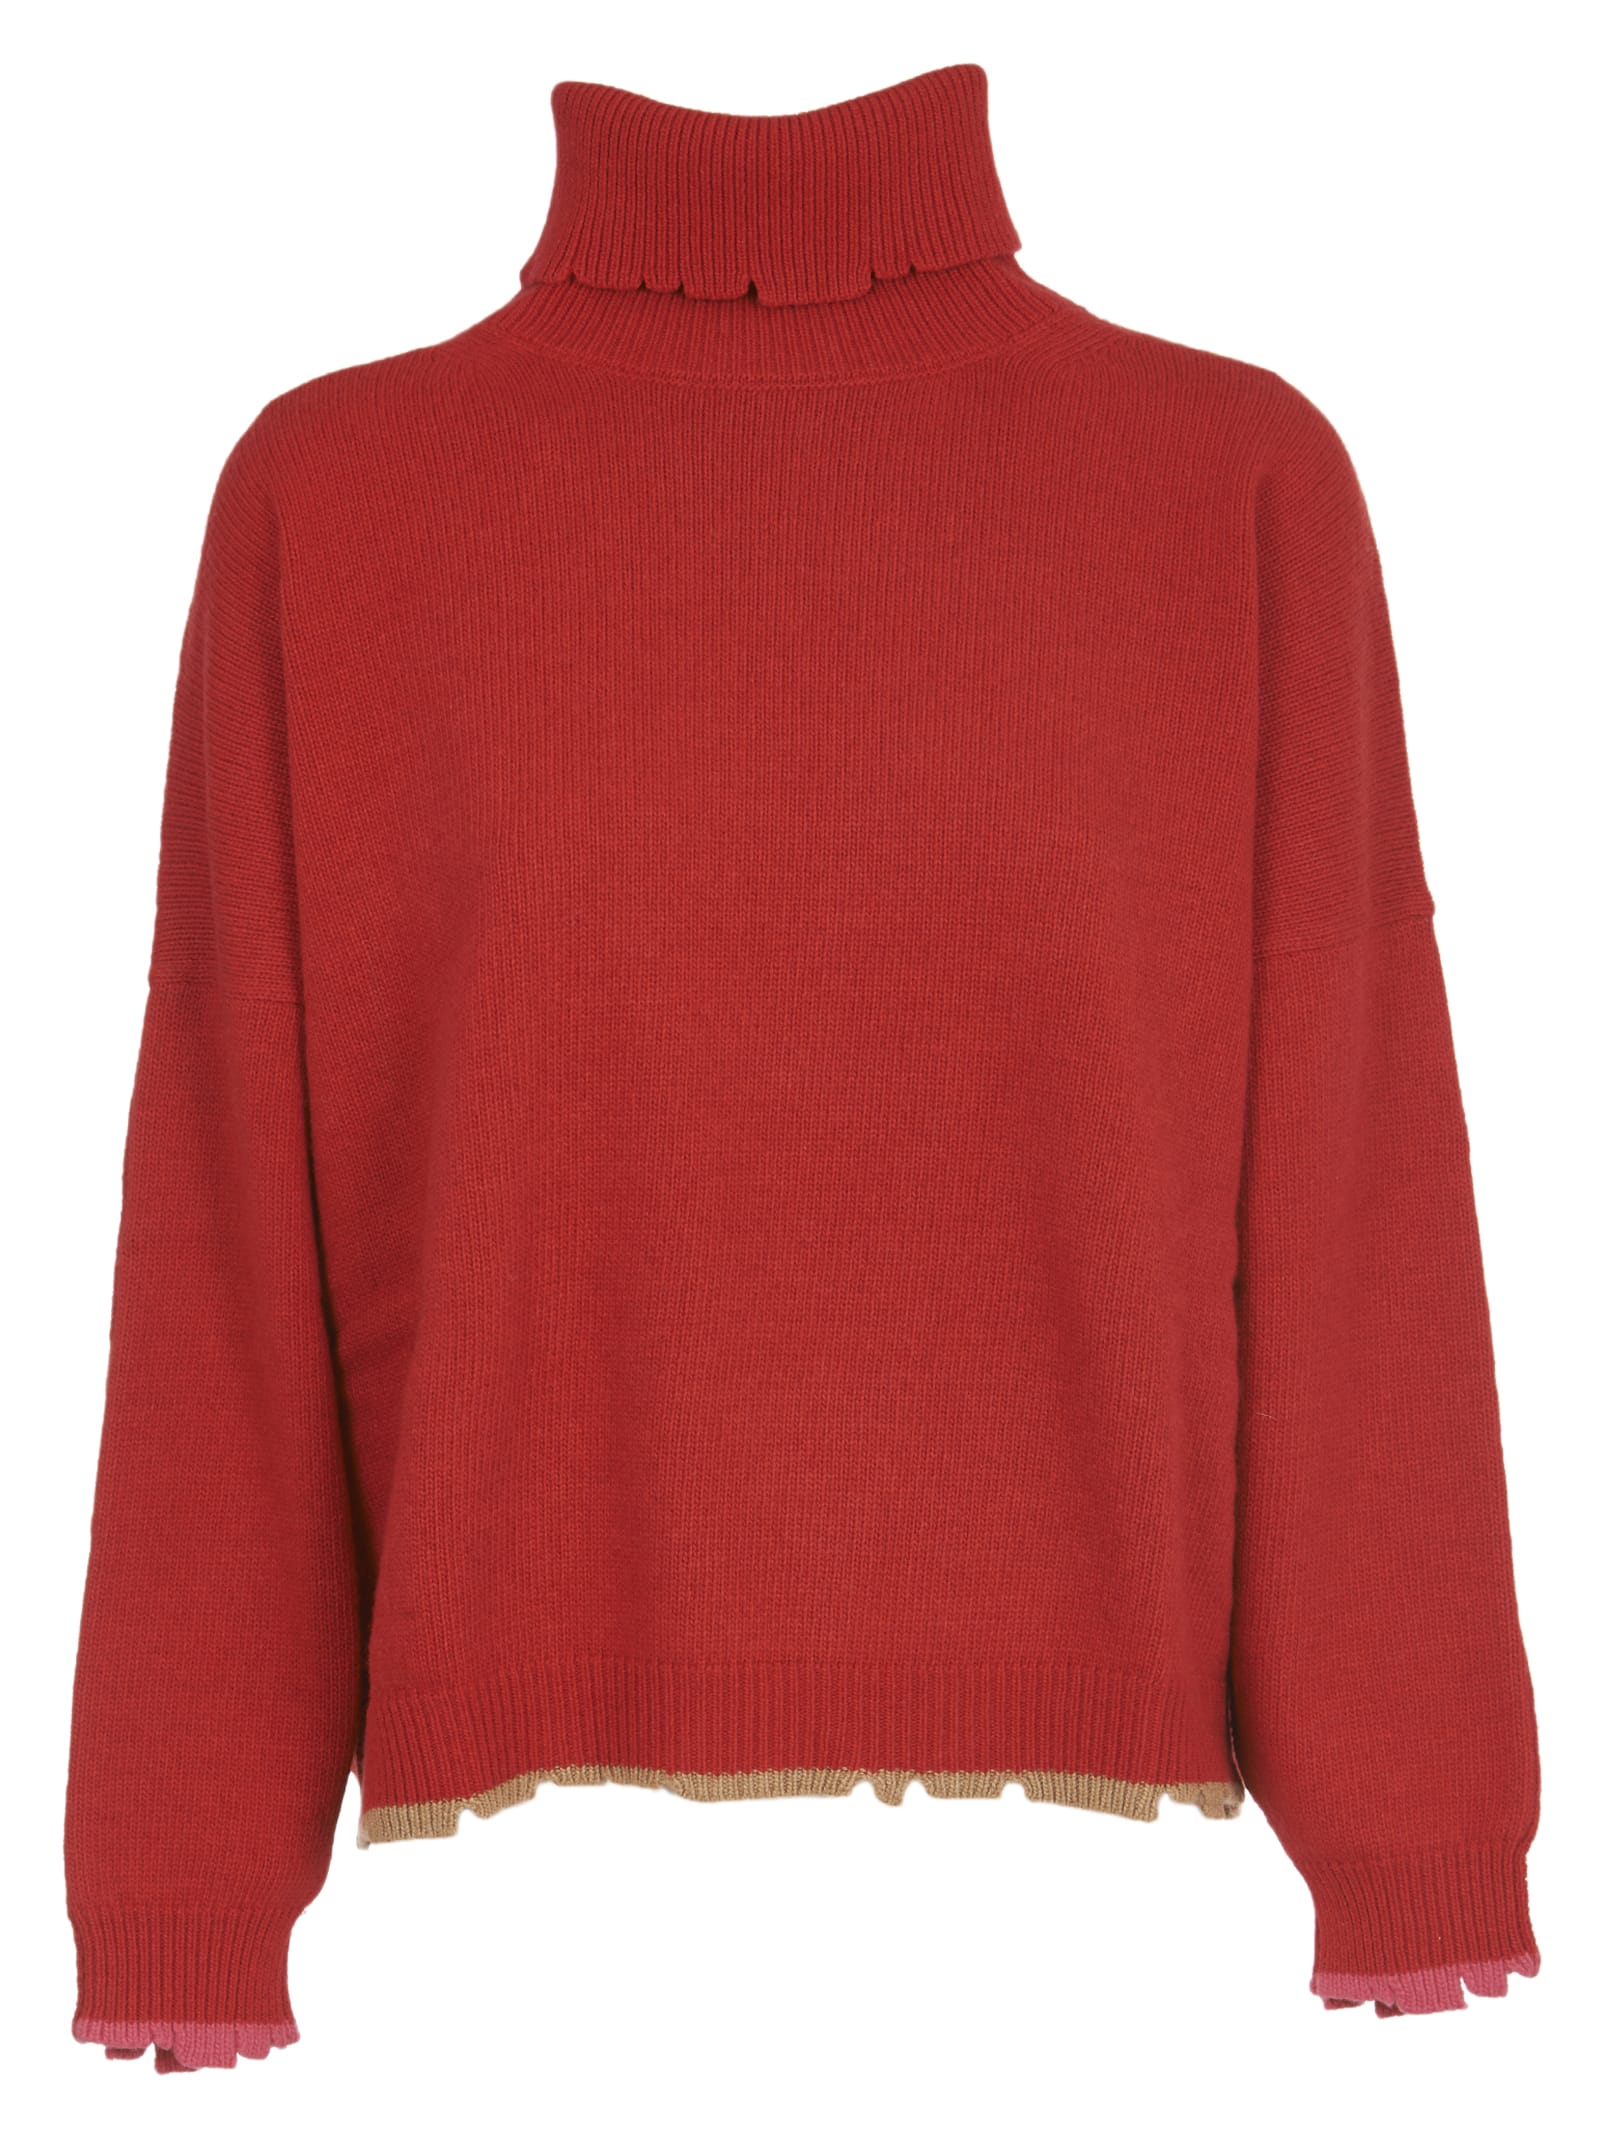 SEMICOUTURE Red Turtleneck Sweater